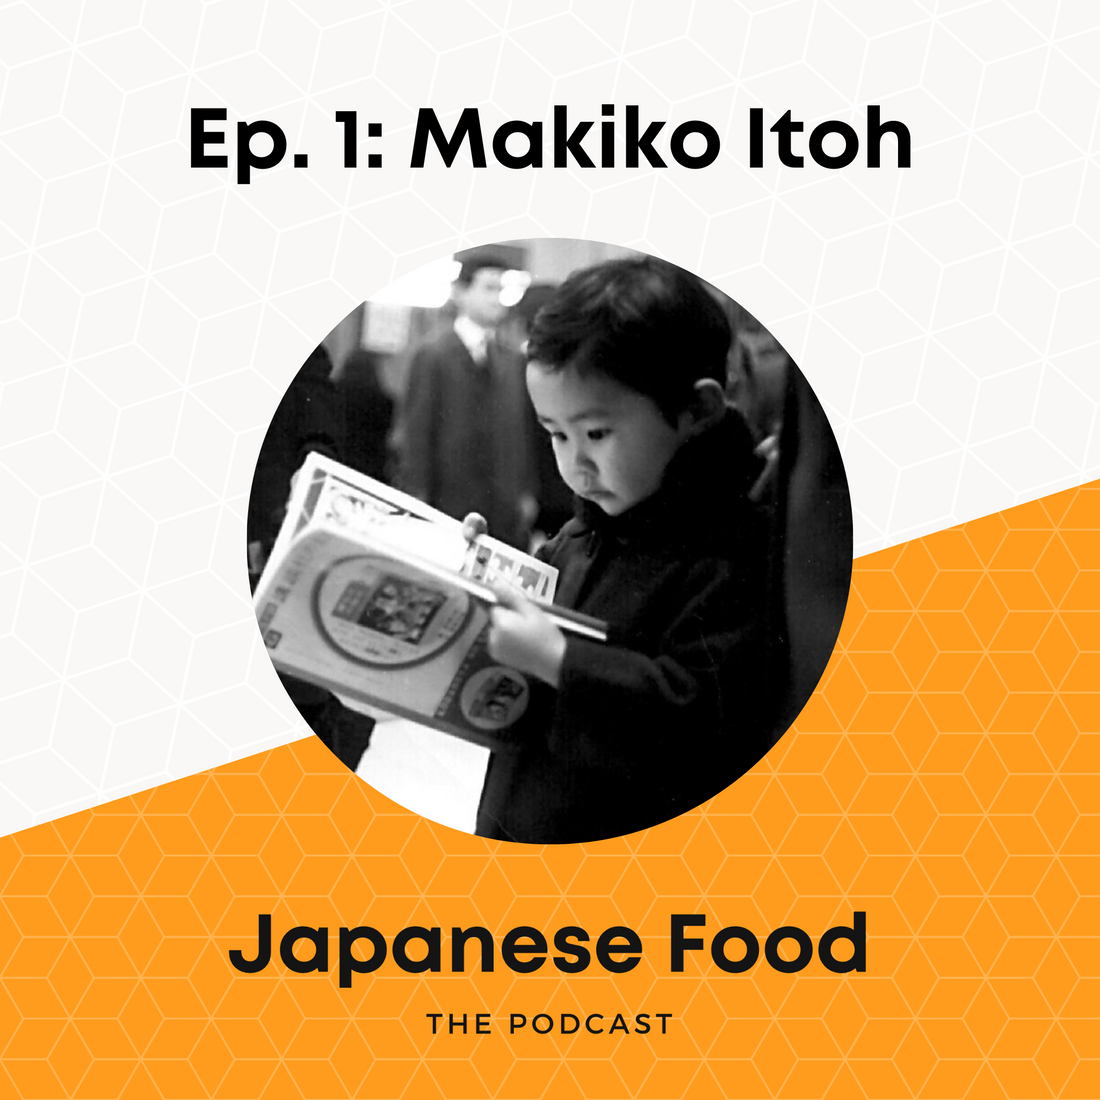 Japanese Food: the Podcast | Episode 1: Makiko Itoh (TRANSCRIPT)